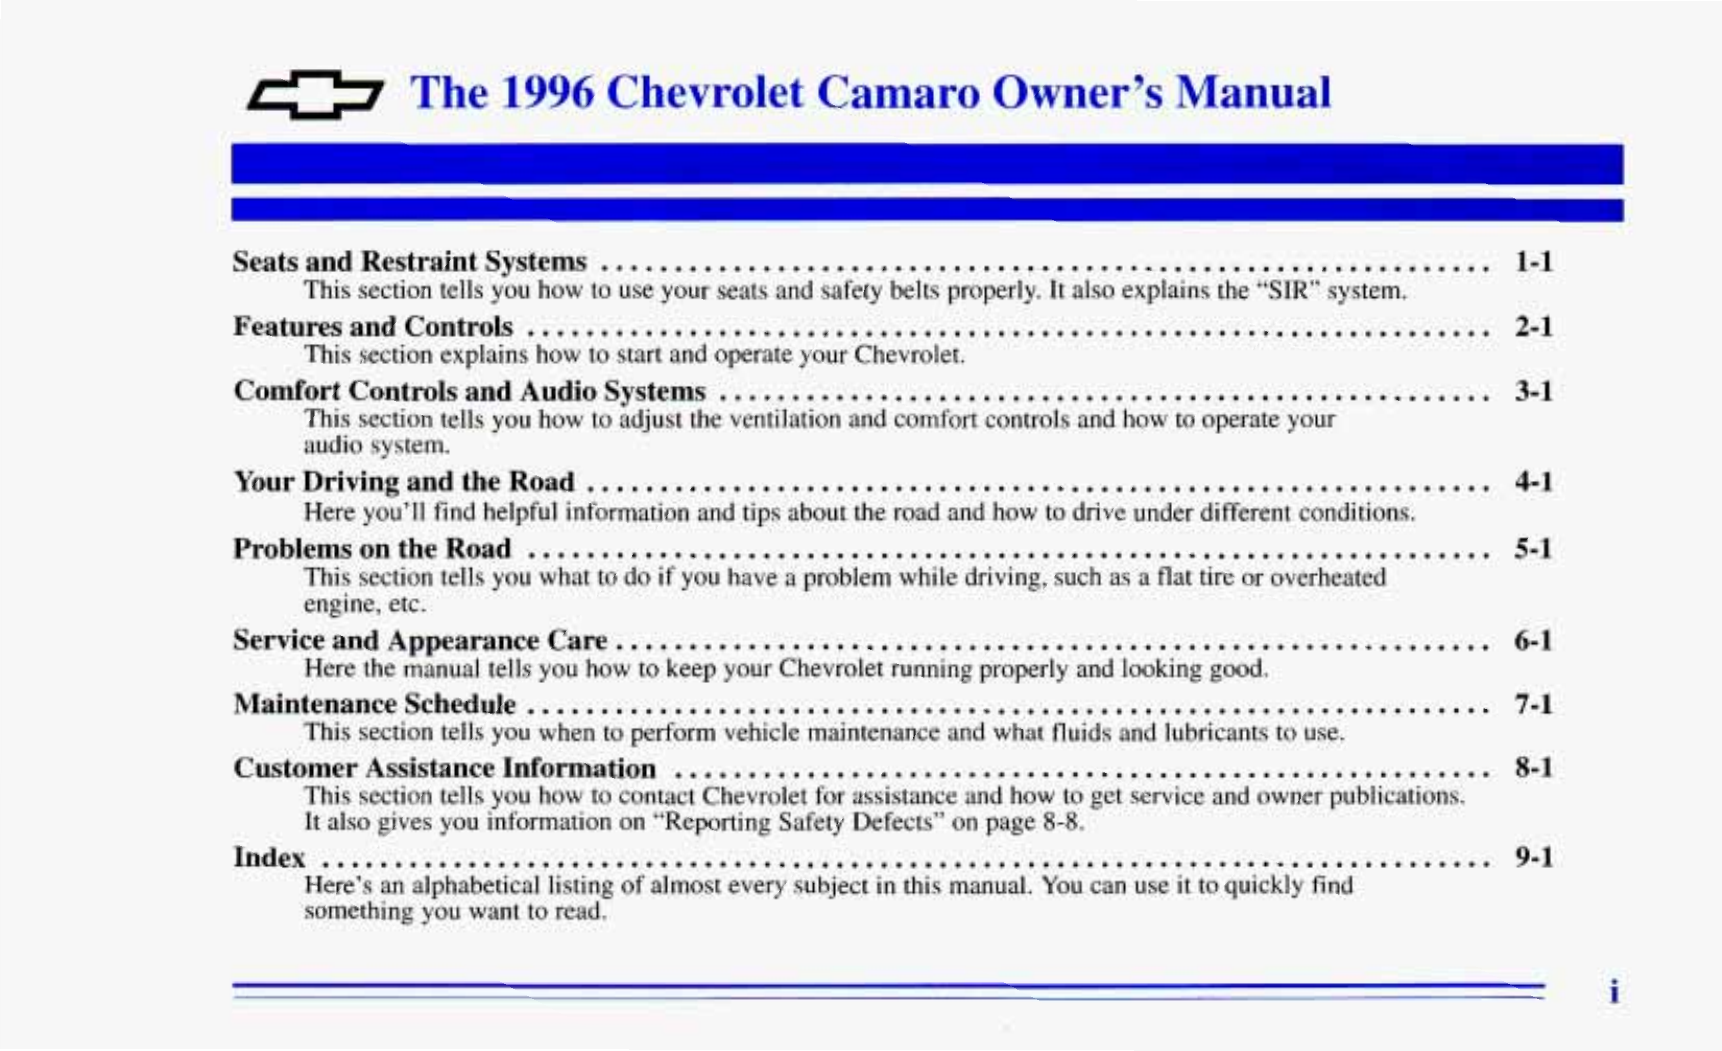 1996 Chevrolet Camaro owners manual Preview image 2